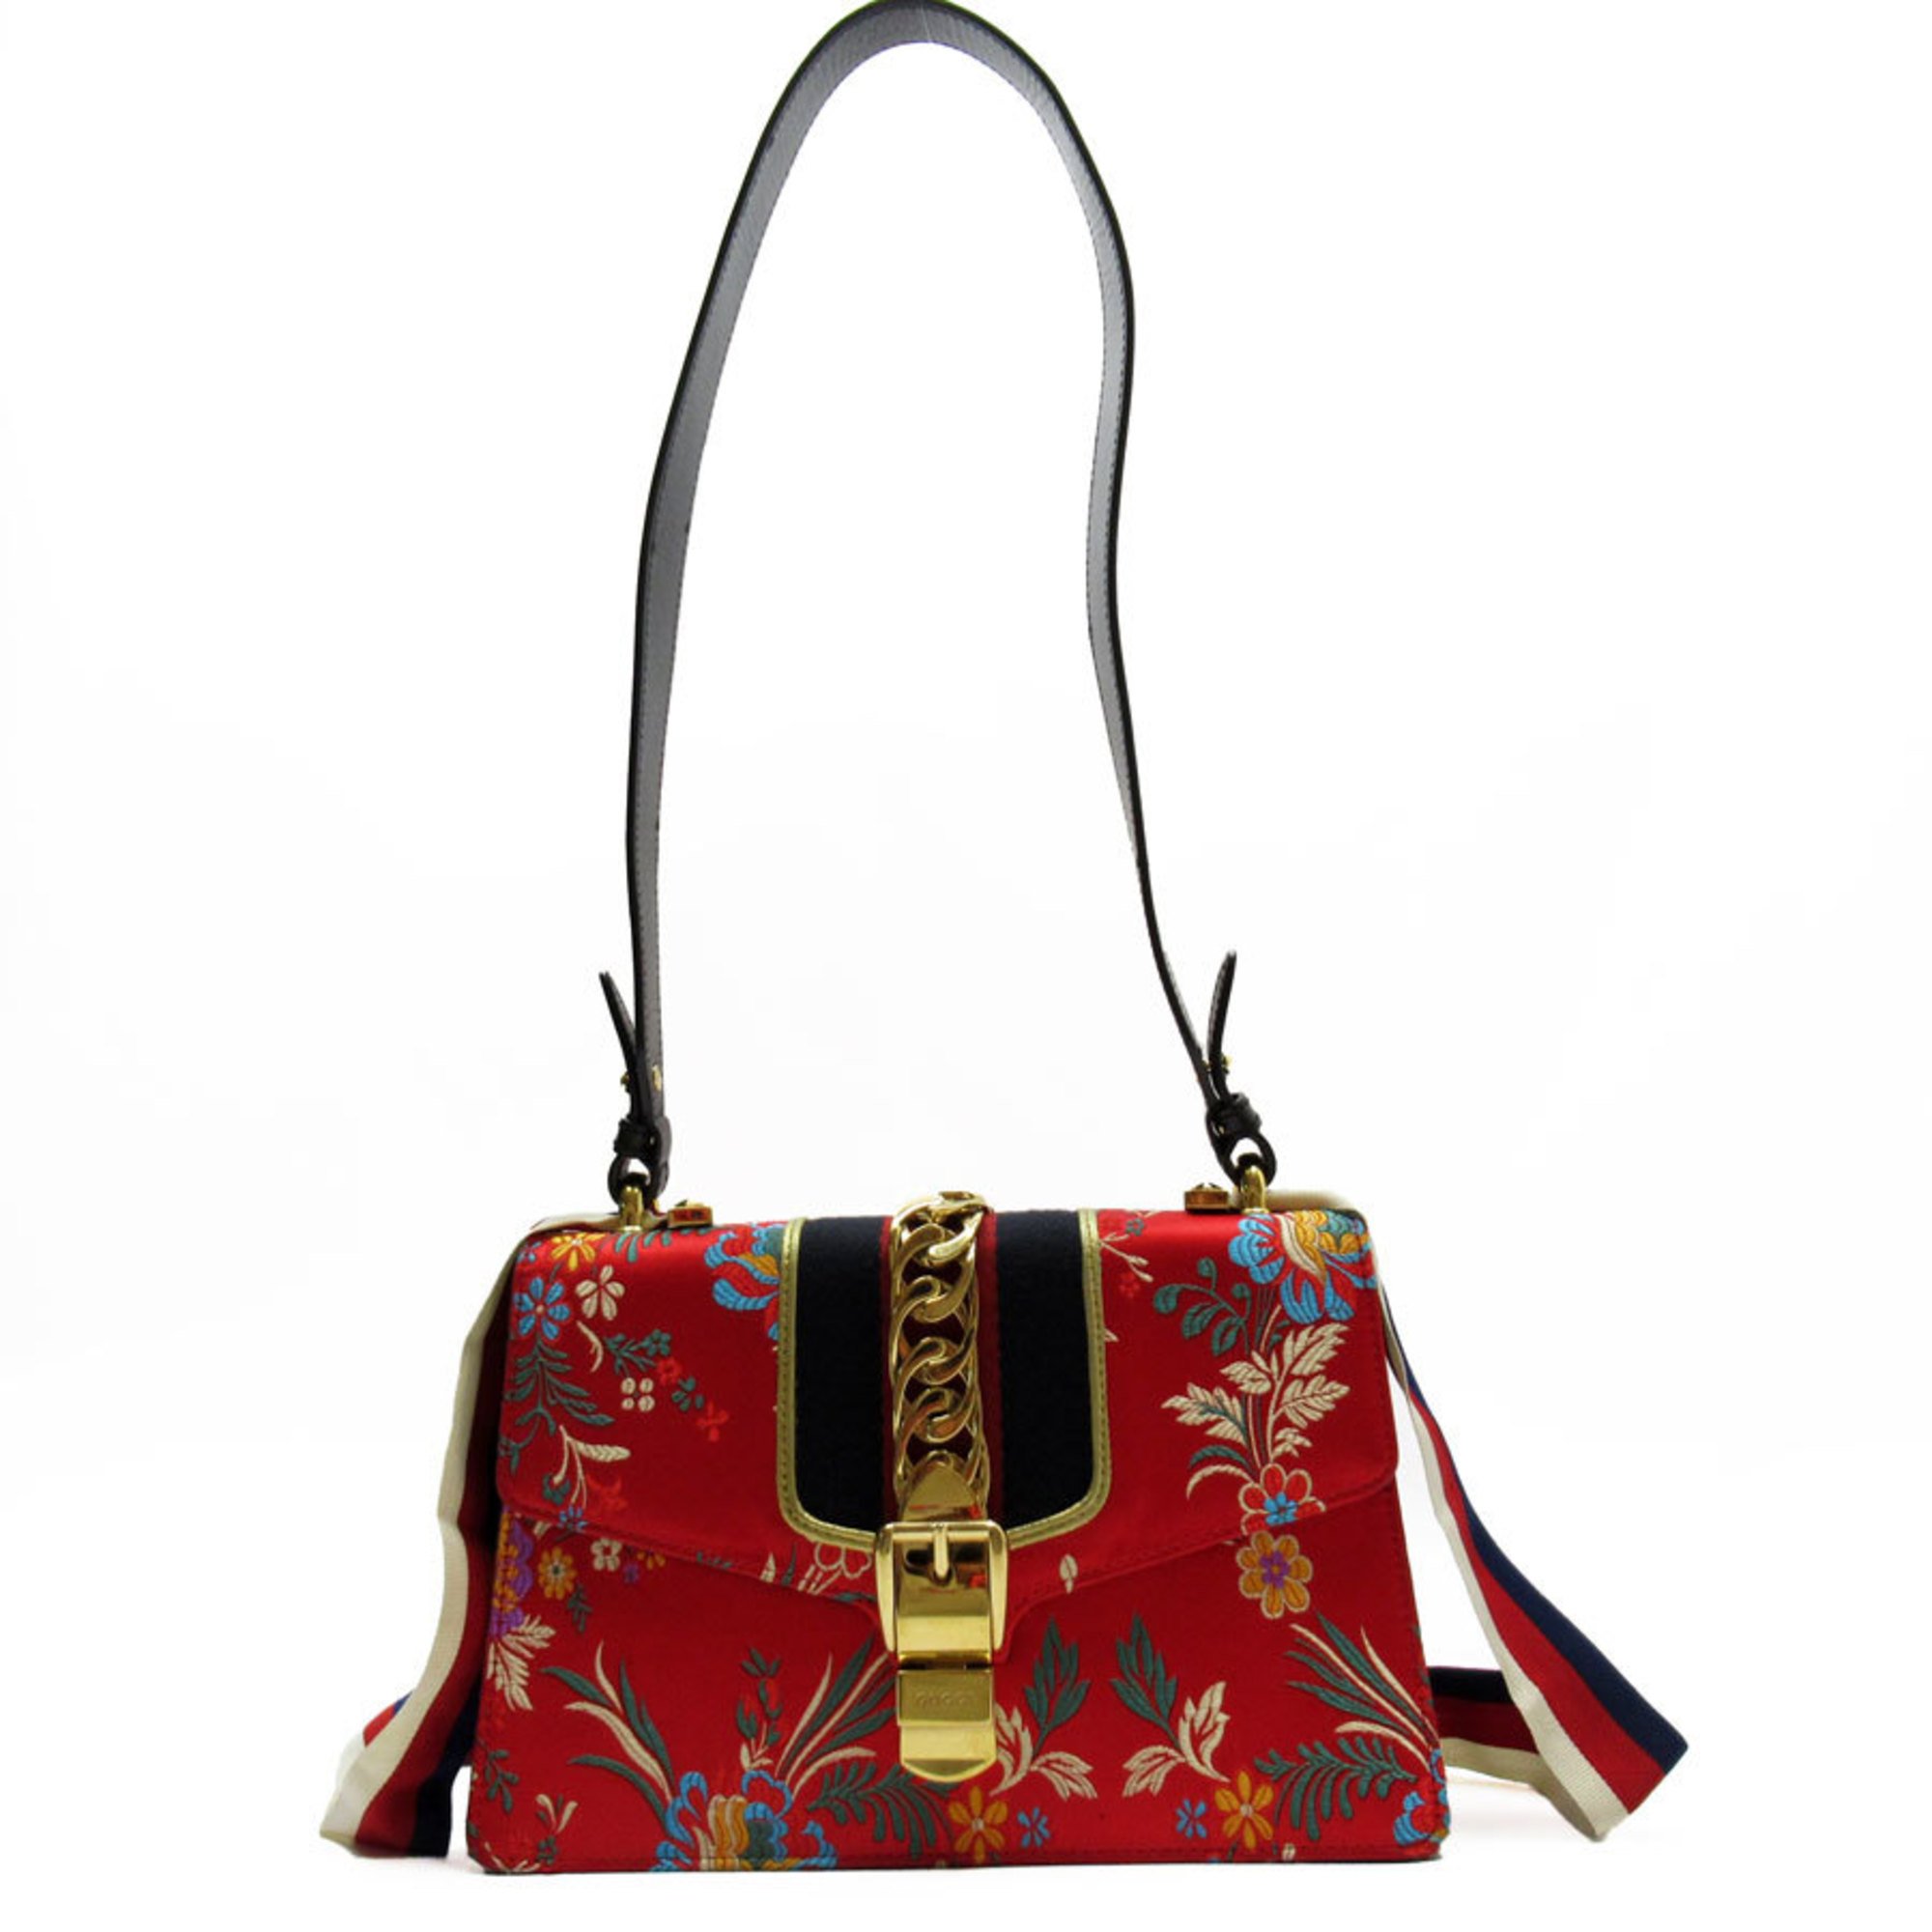 GUCCI Shoulder Bag Sylvie Satin Leather Red Multicolor Gold Women's 421882 w0528a